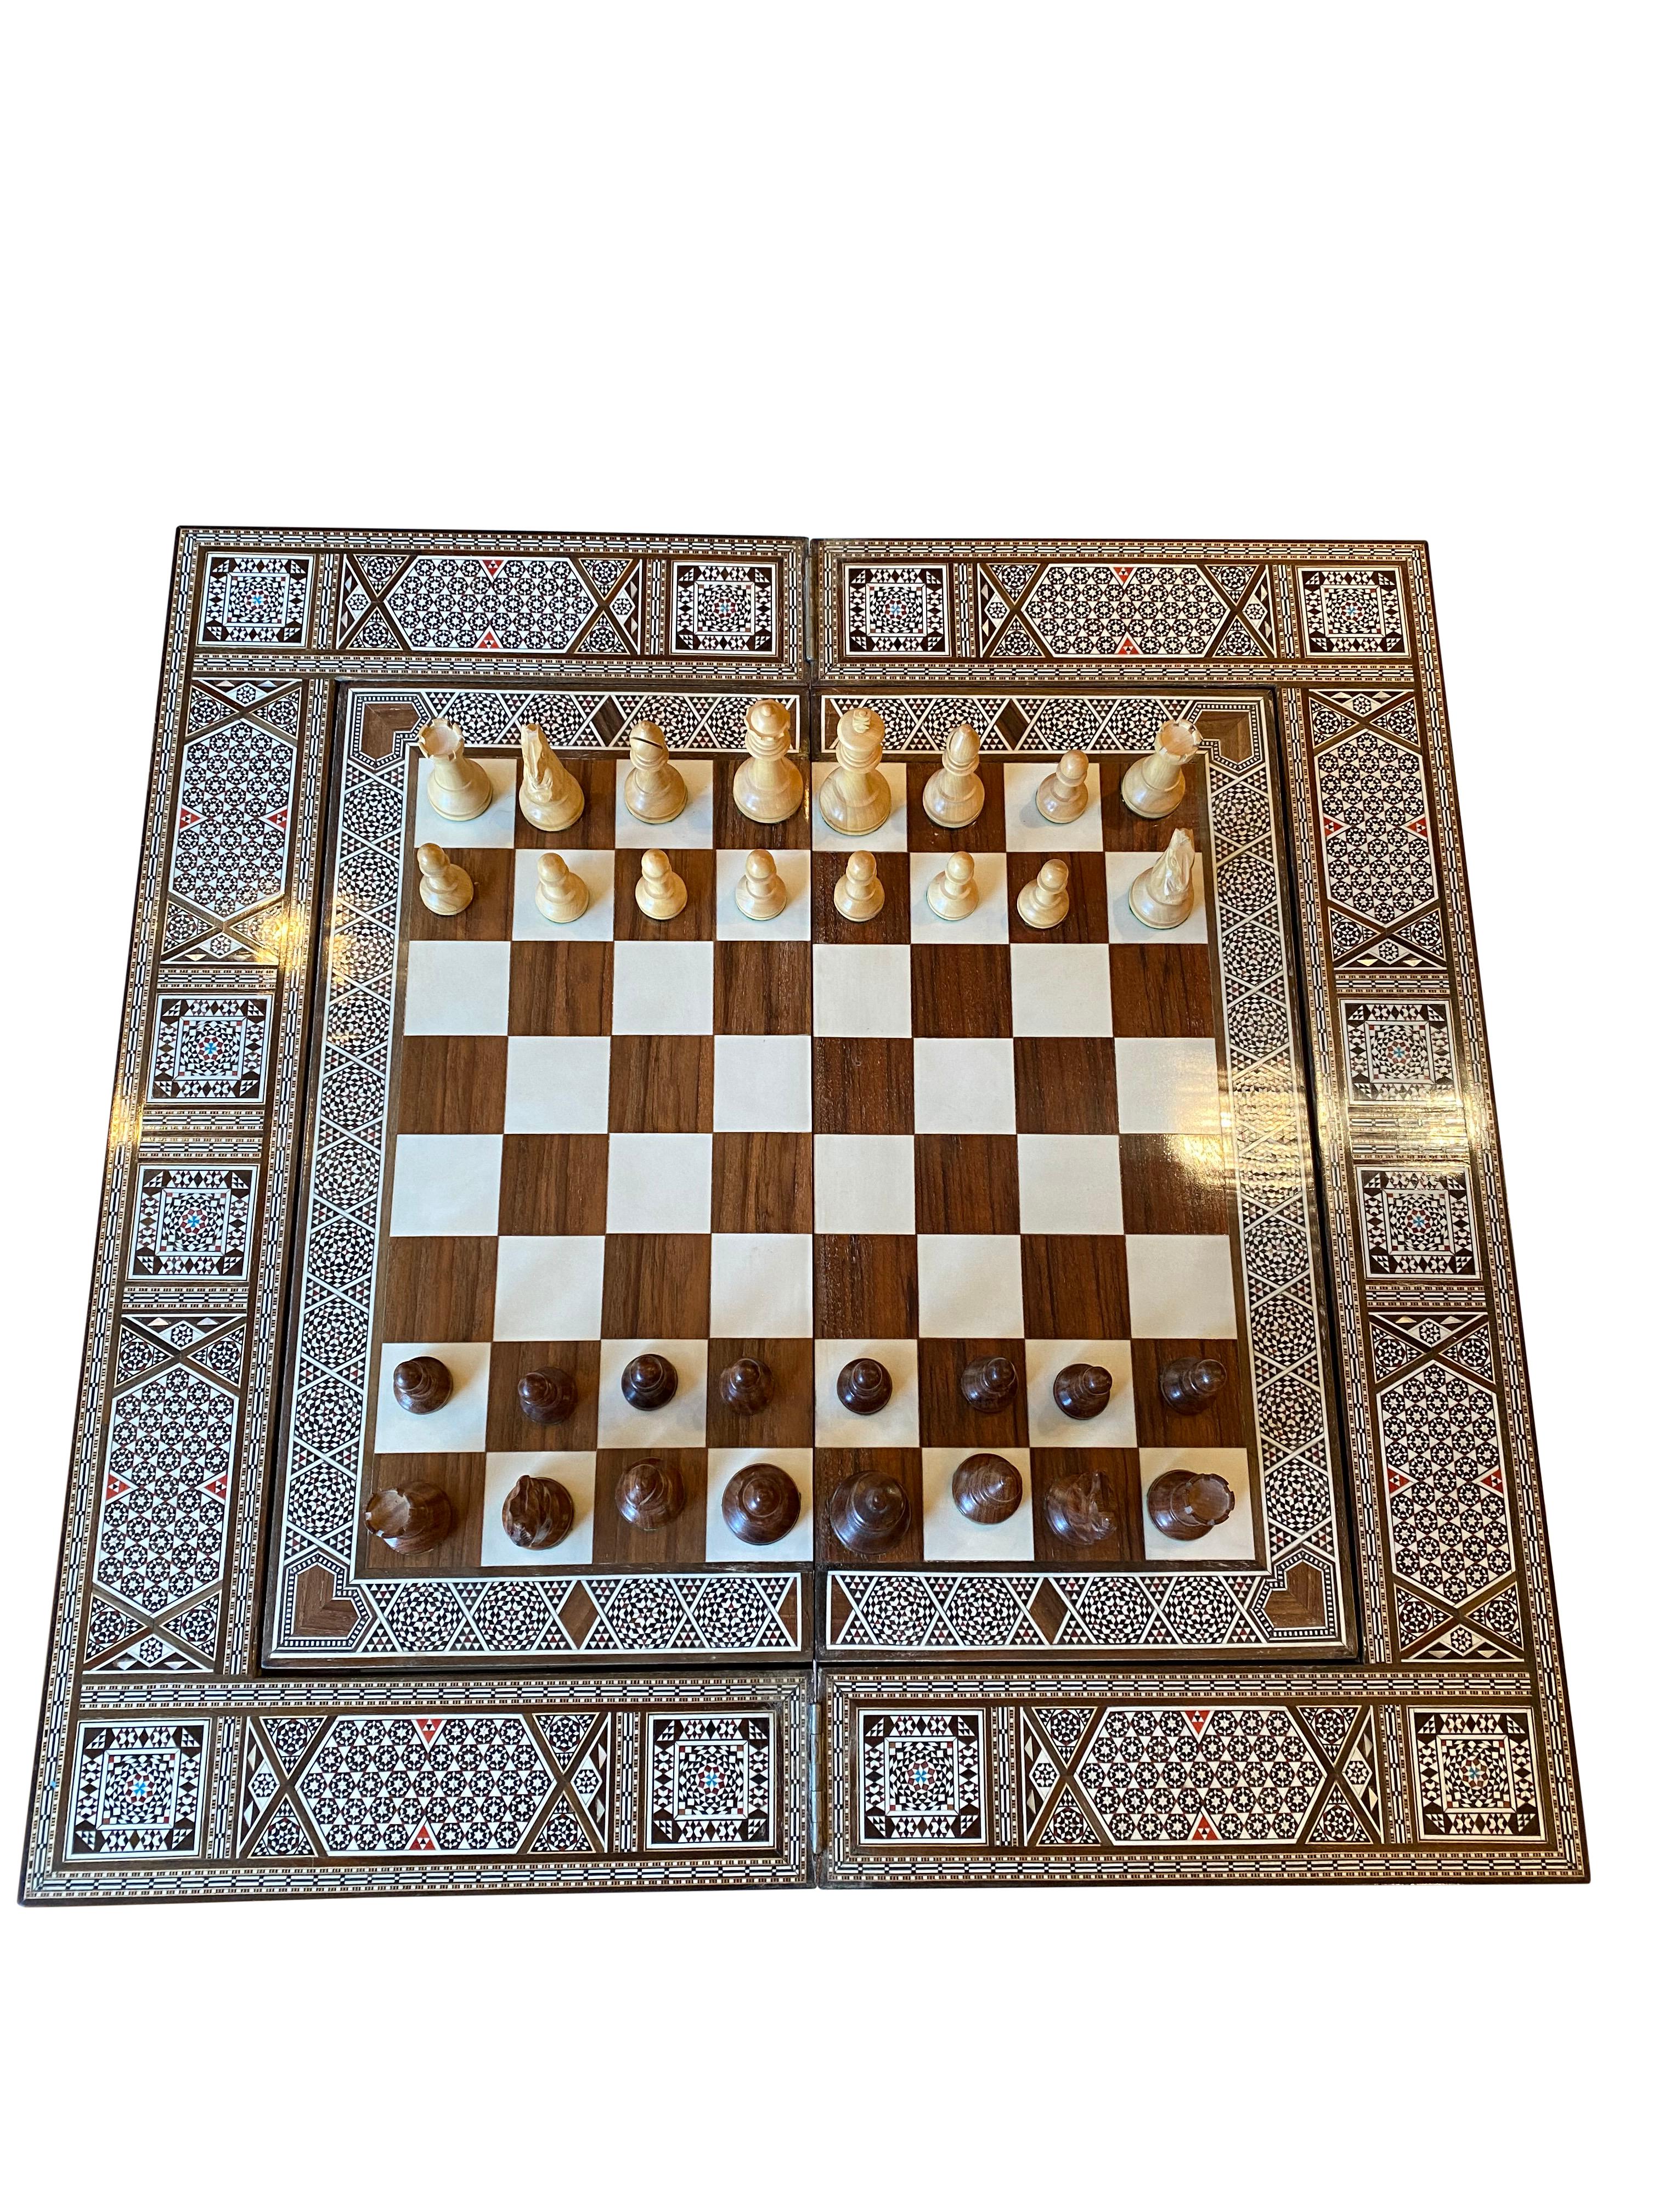 Asian Mid-20th Century Syrian Damascus Inlaid Card, Chess, Backgammon, Games Table